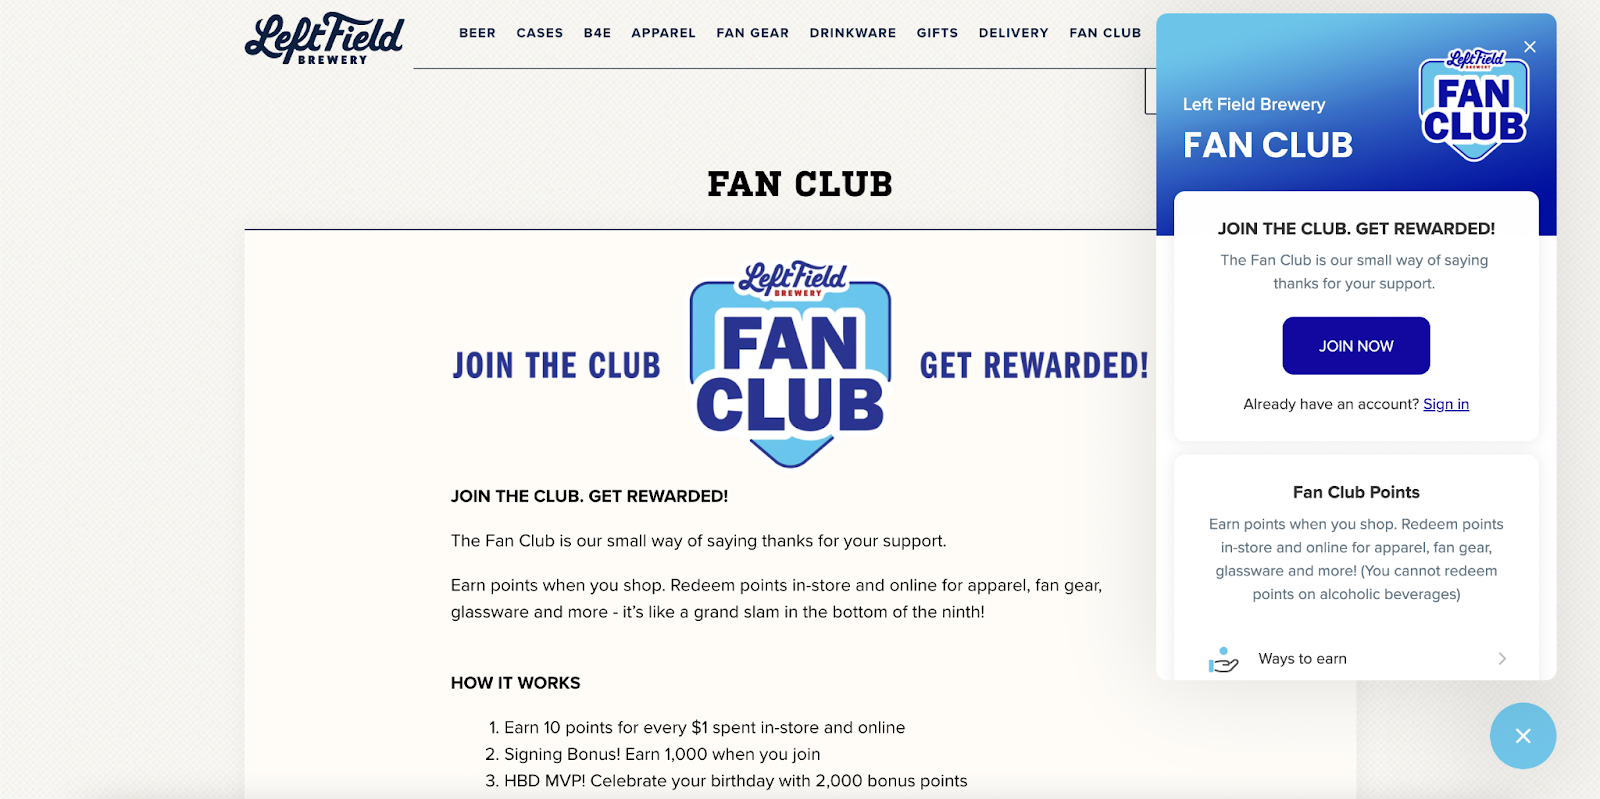 Creative rewards program names–A screenshot of Left Field Brewery’s Fan Club rewards program explainer page and their rewards program launcher on the side. The page title is “Join the Club. Get Rewarded!”